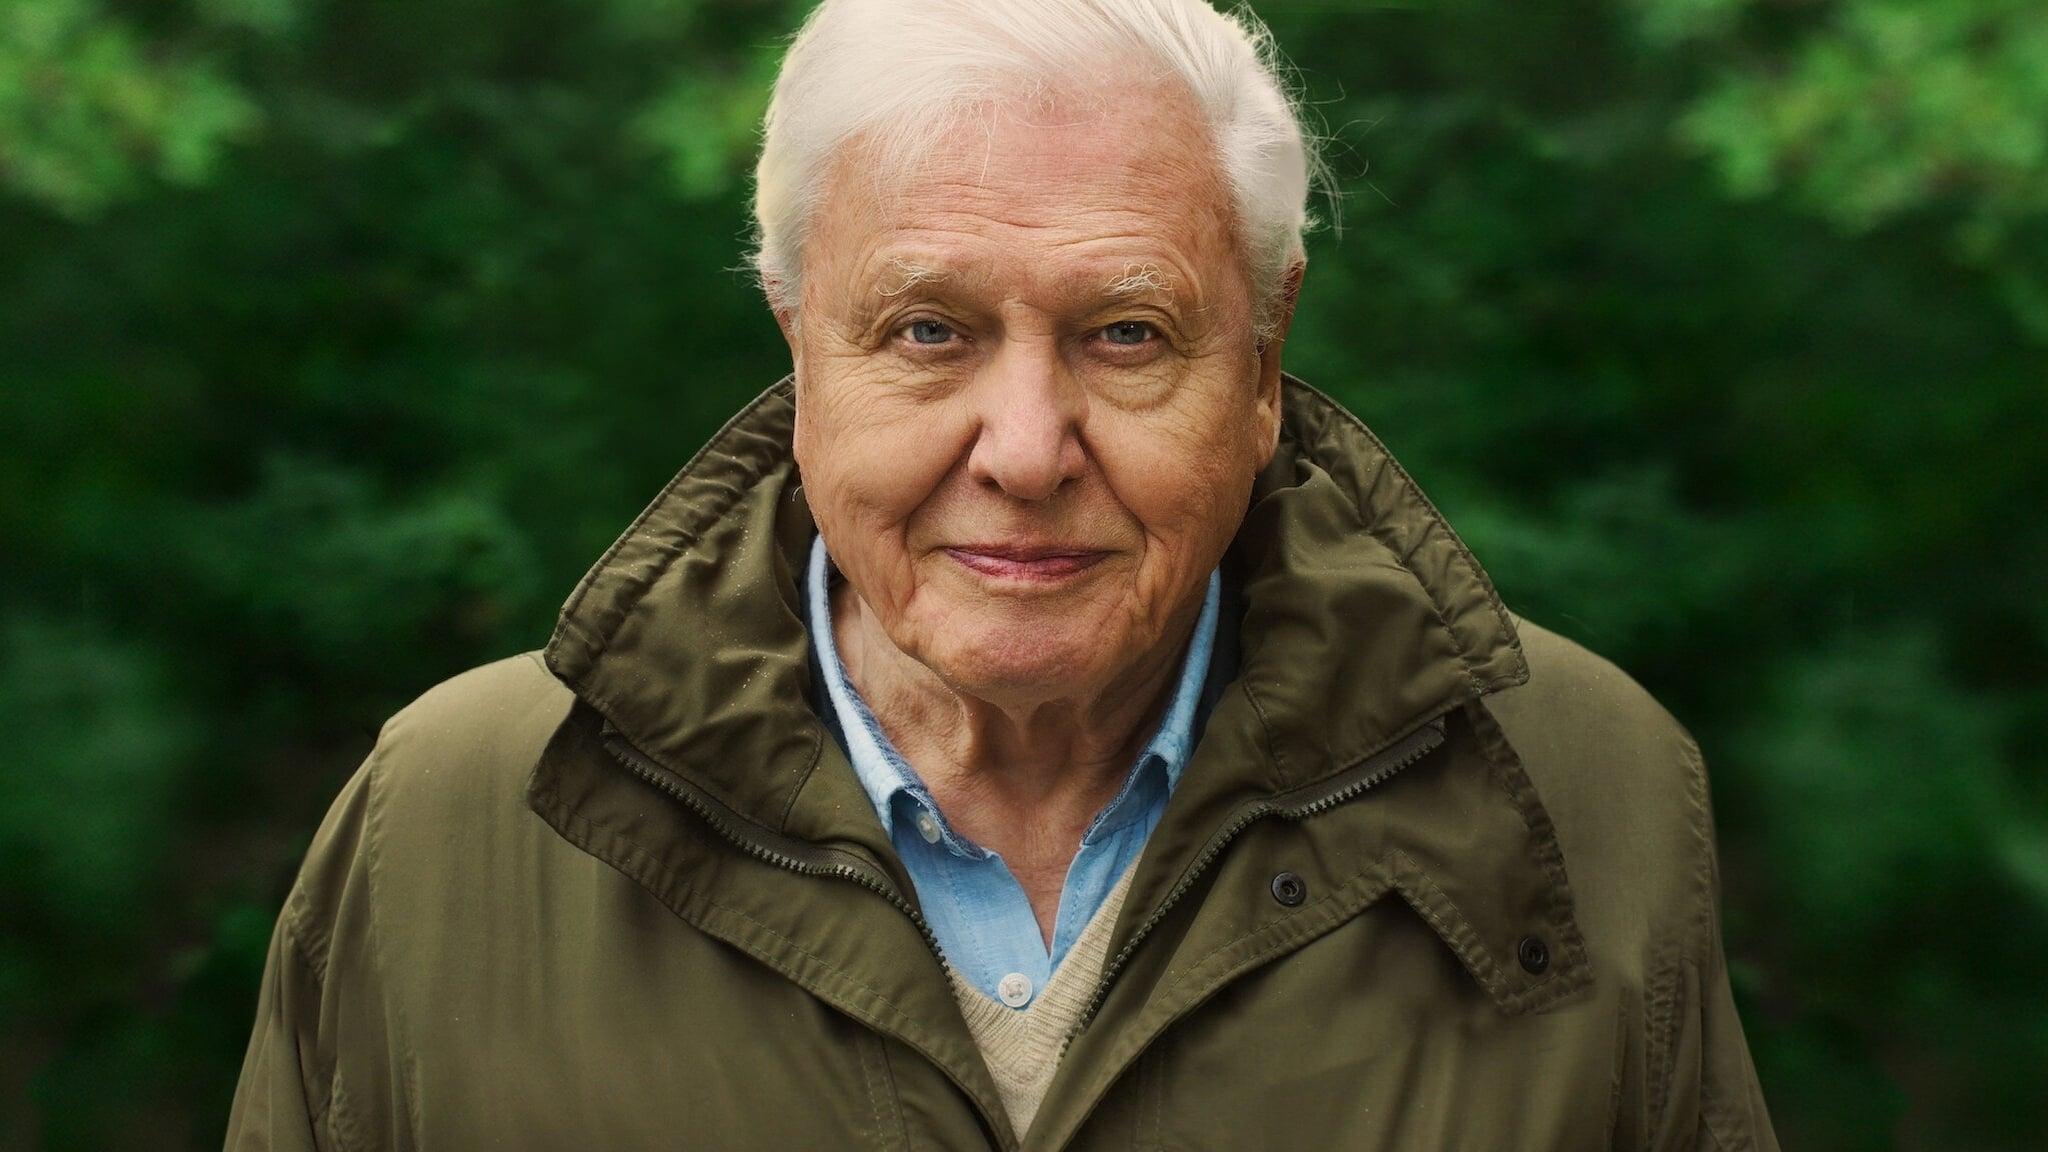 David Attenborough: A Life on Our Planet backdrop